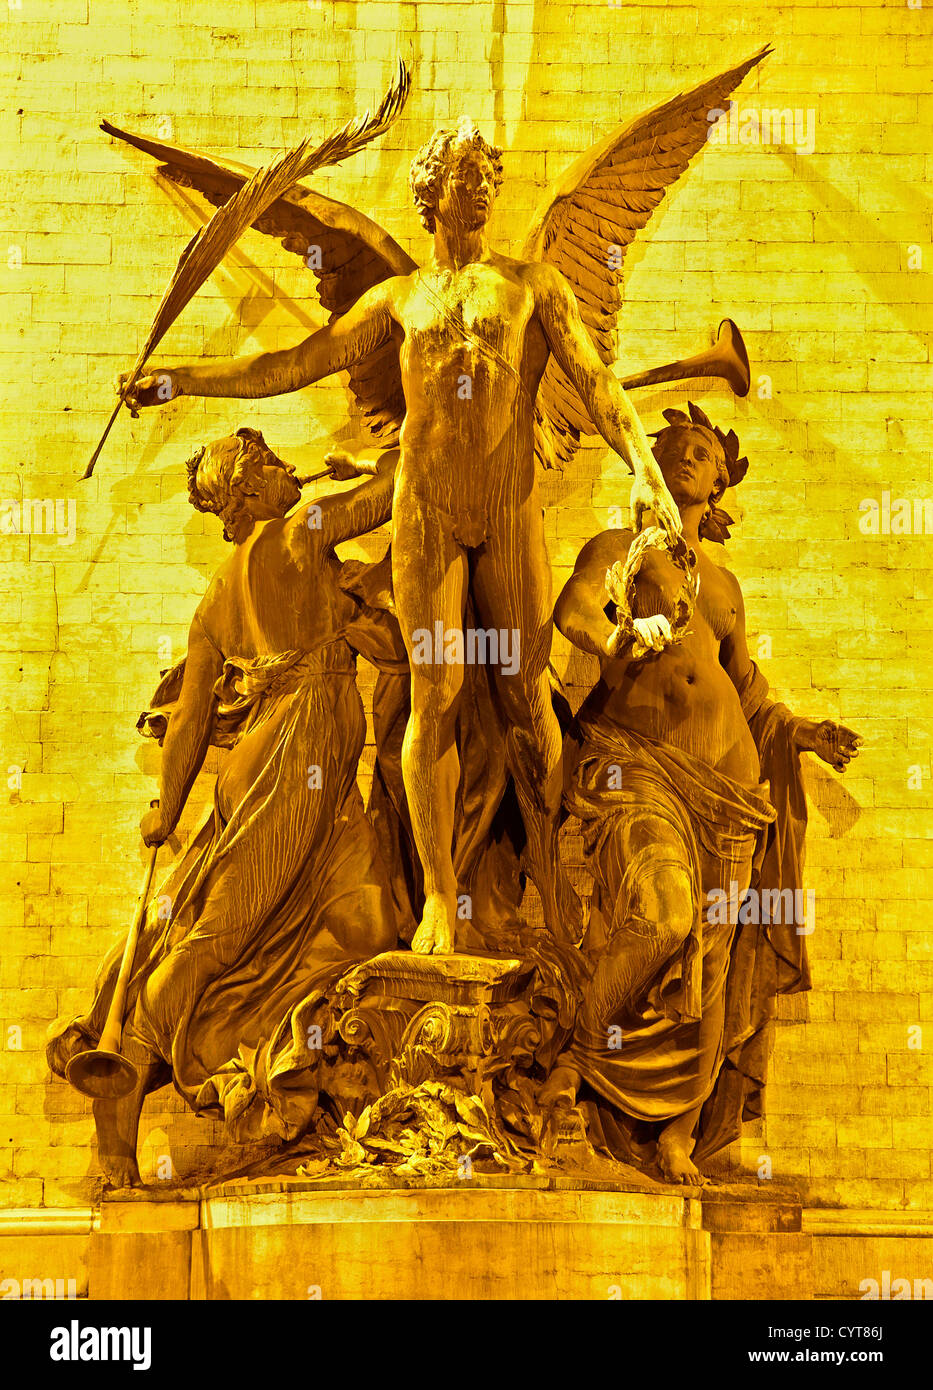 Brussels - statue from Triumphal Arch in the Parc du Cinquantenaire at night Stock Photo